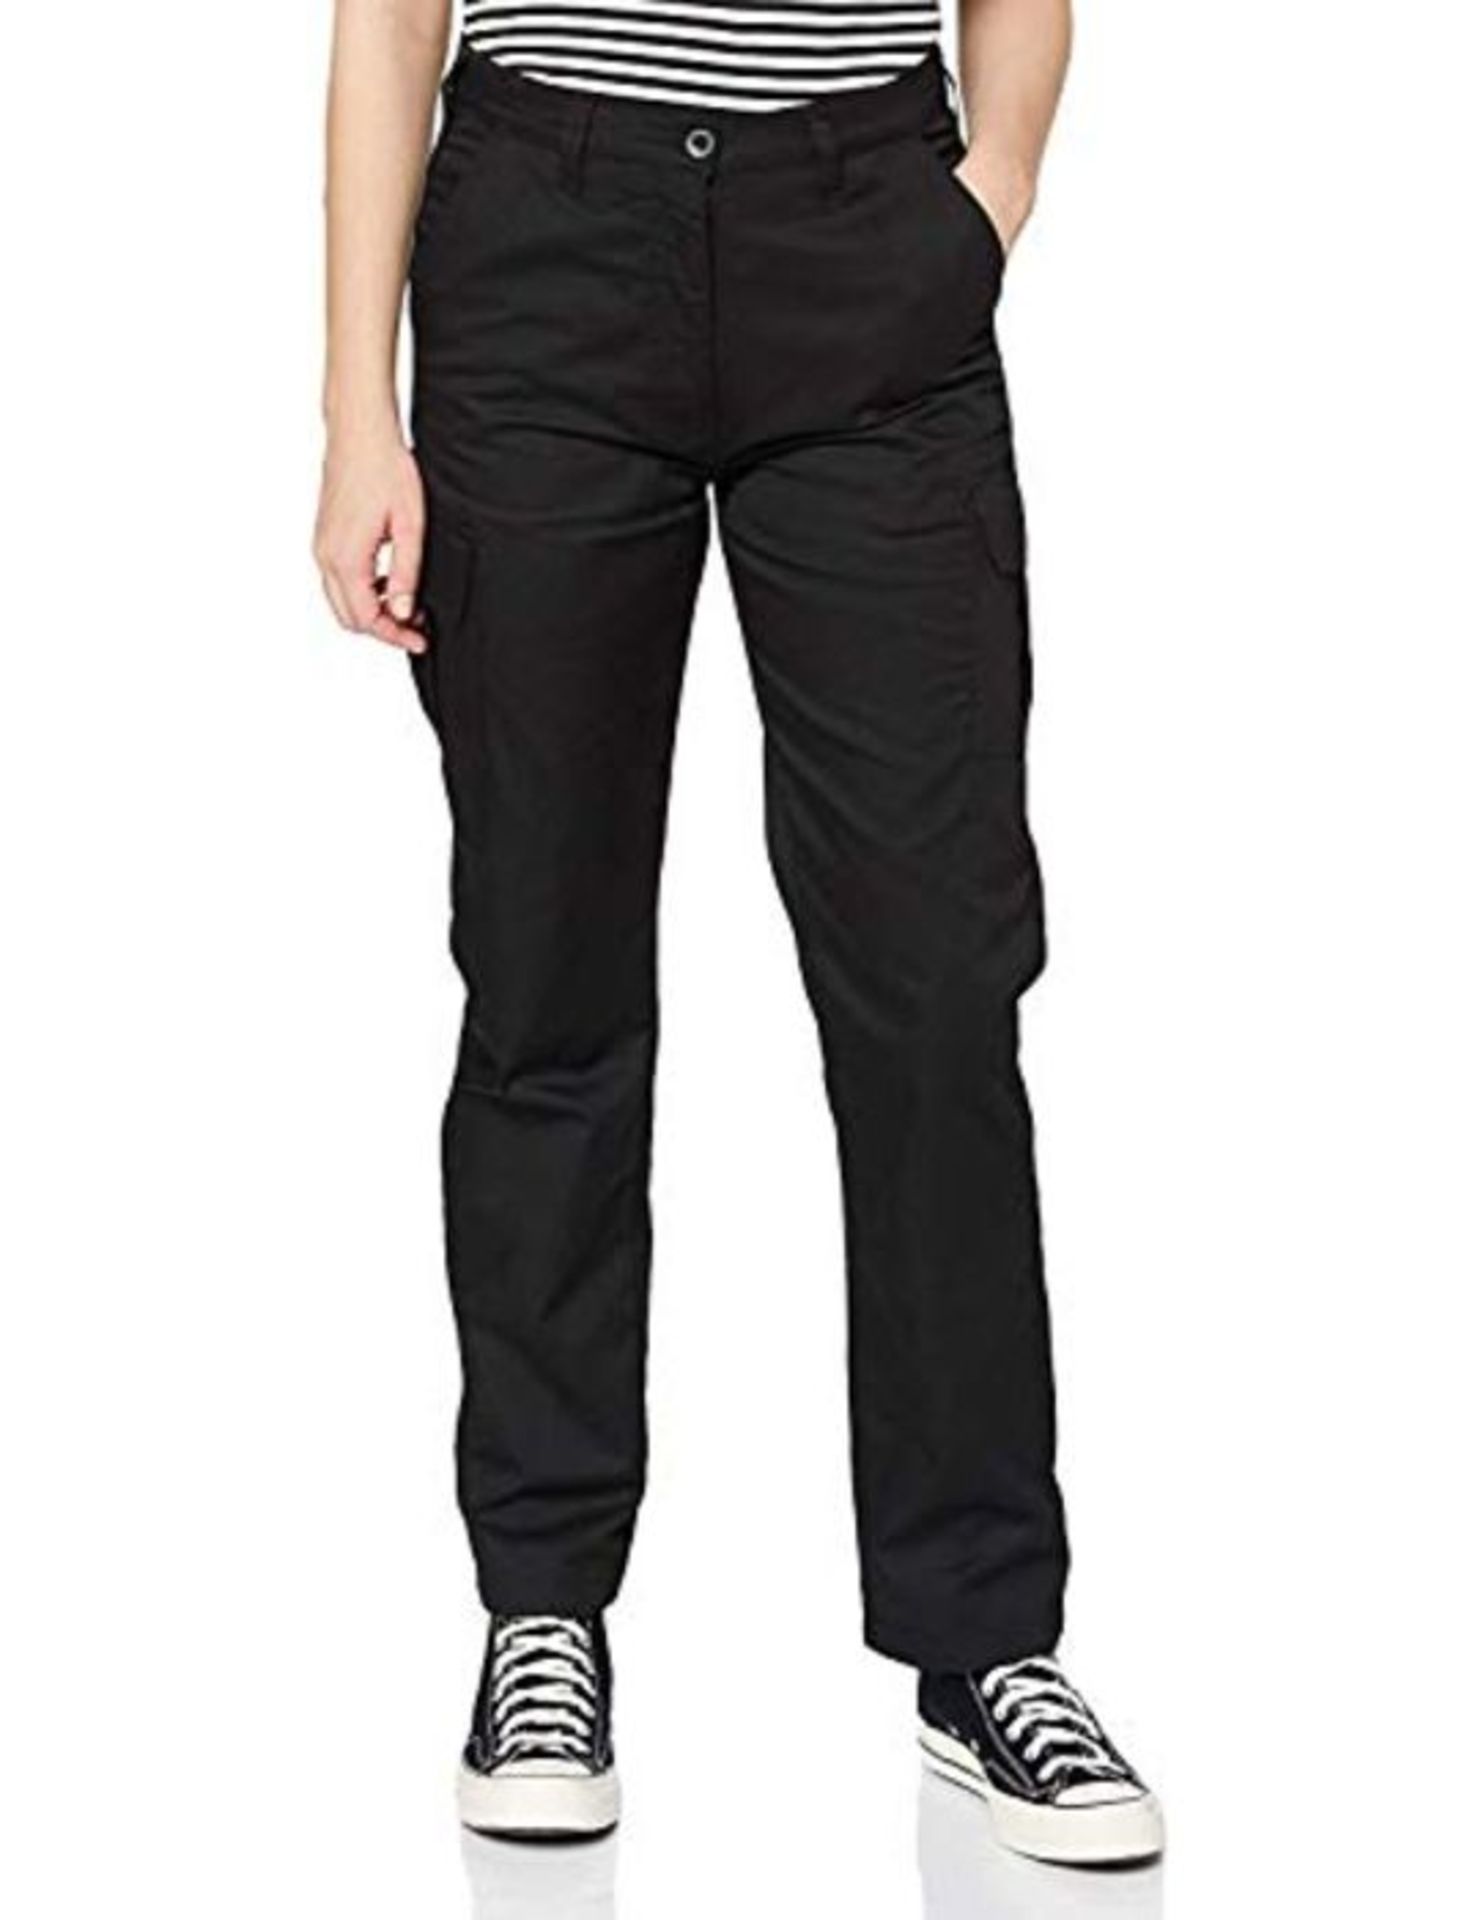 Lee Cooper Ladies Heavy Duty Easy Care Multi Pocket Work Safety Classic Cargo Pants Tr